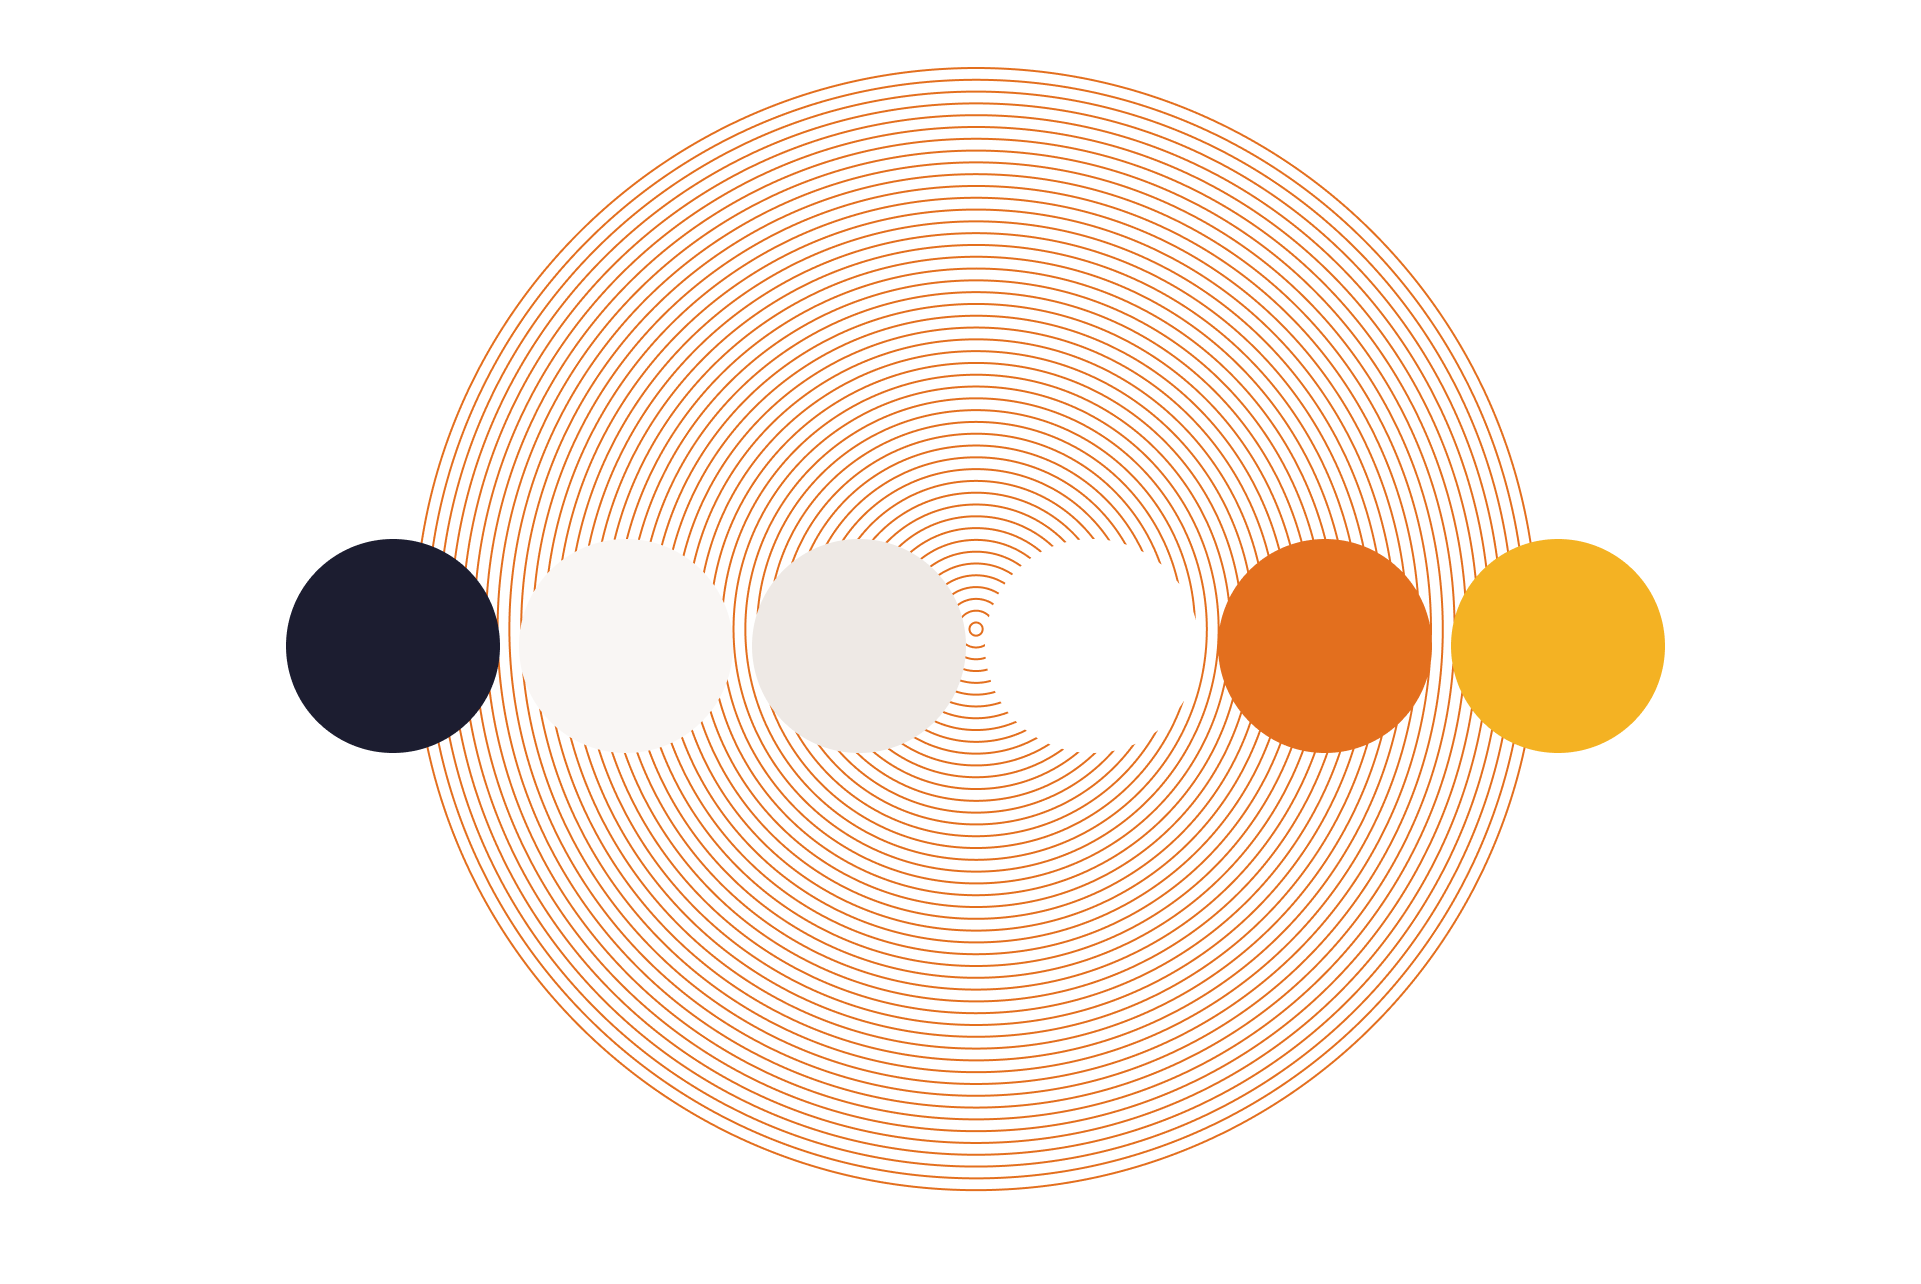 Style Tiles from CARE's site, overlayed on orange circle